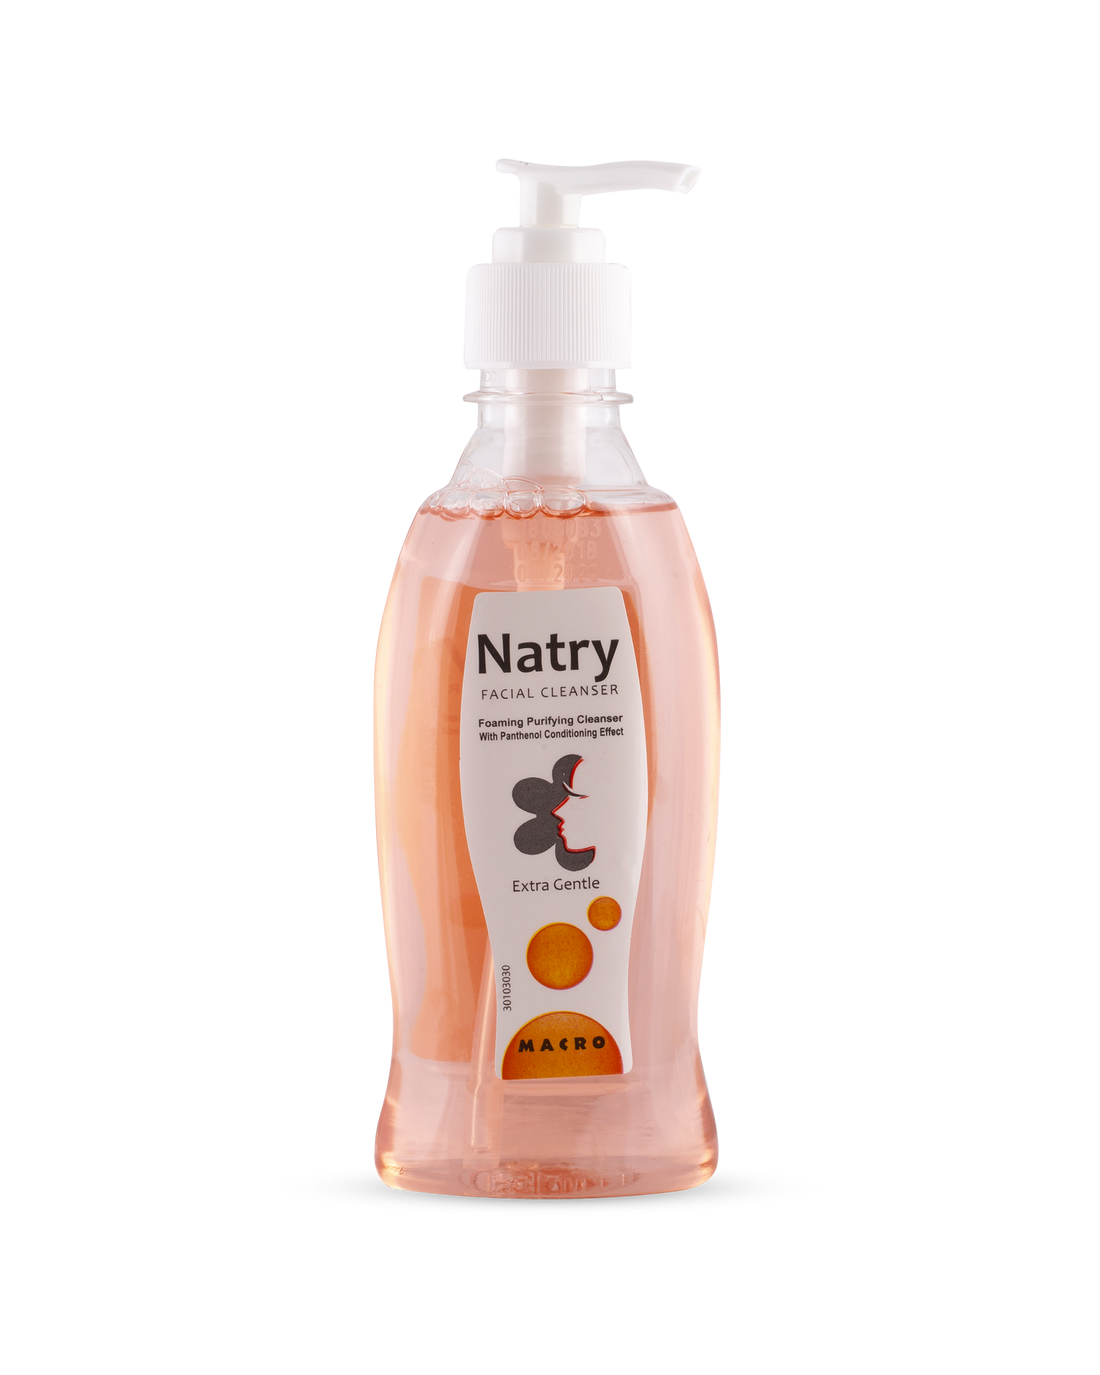 Natry Facial Cleanser